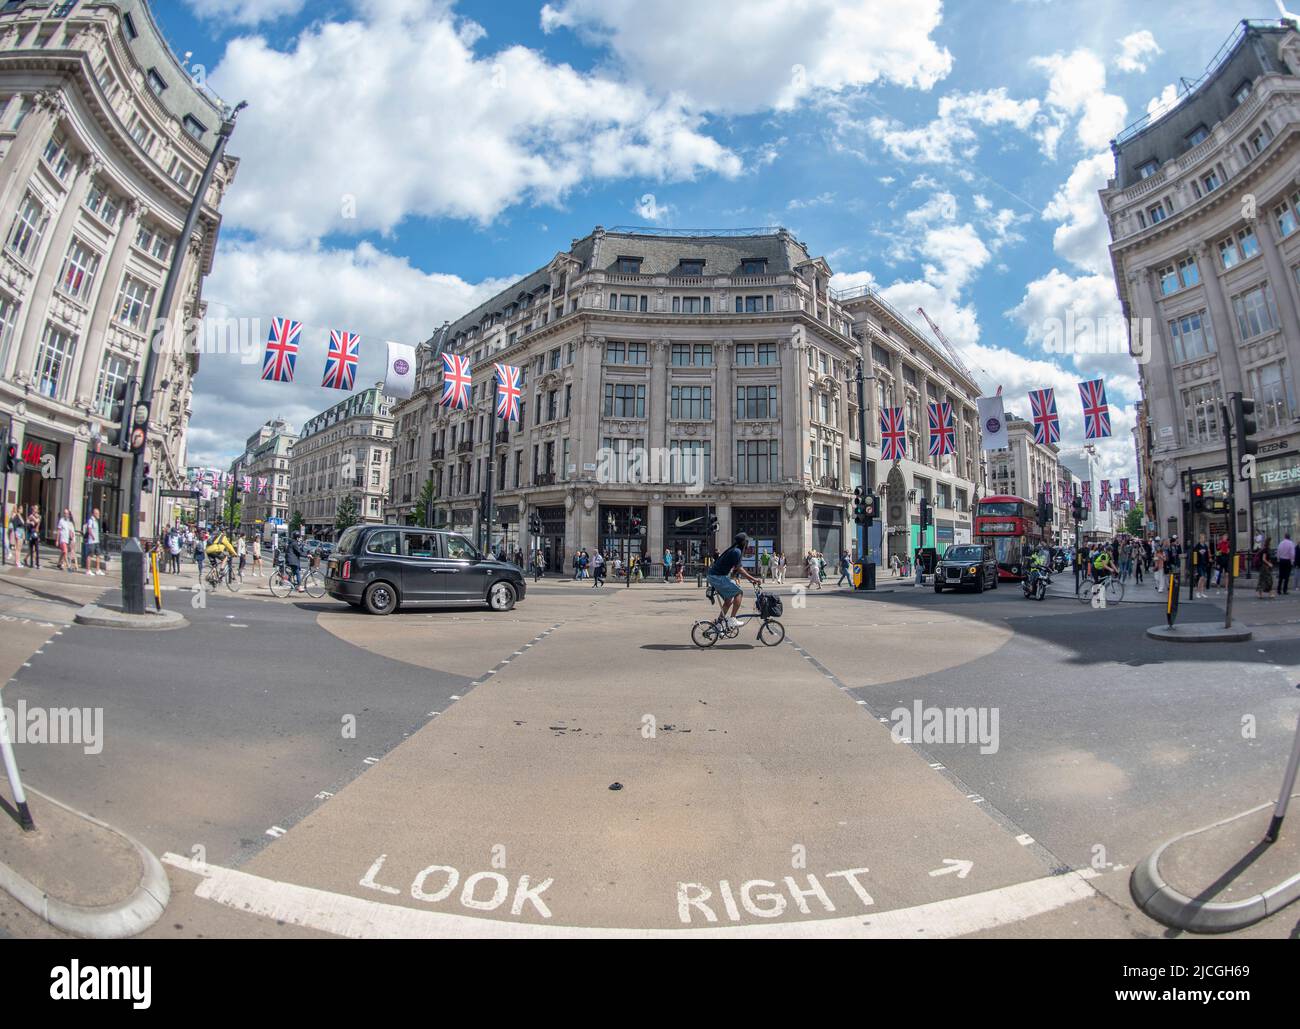 Oxford Street, London, UK. 13 June 2022. Platinum Jubilee flags hang above the shopping streets around Oxford Circus on a warm day in this fisheye lens view. Credit: Malcolm Park/Alamy Live News. Stock Photo